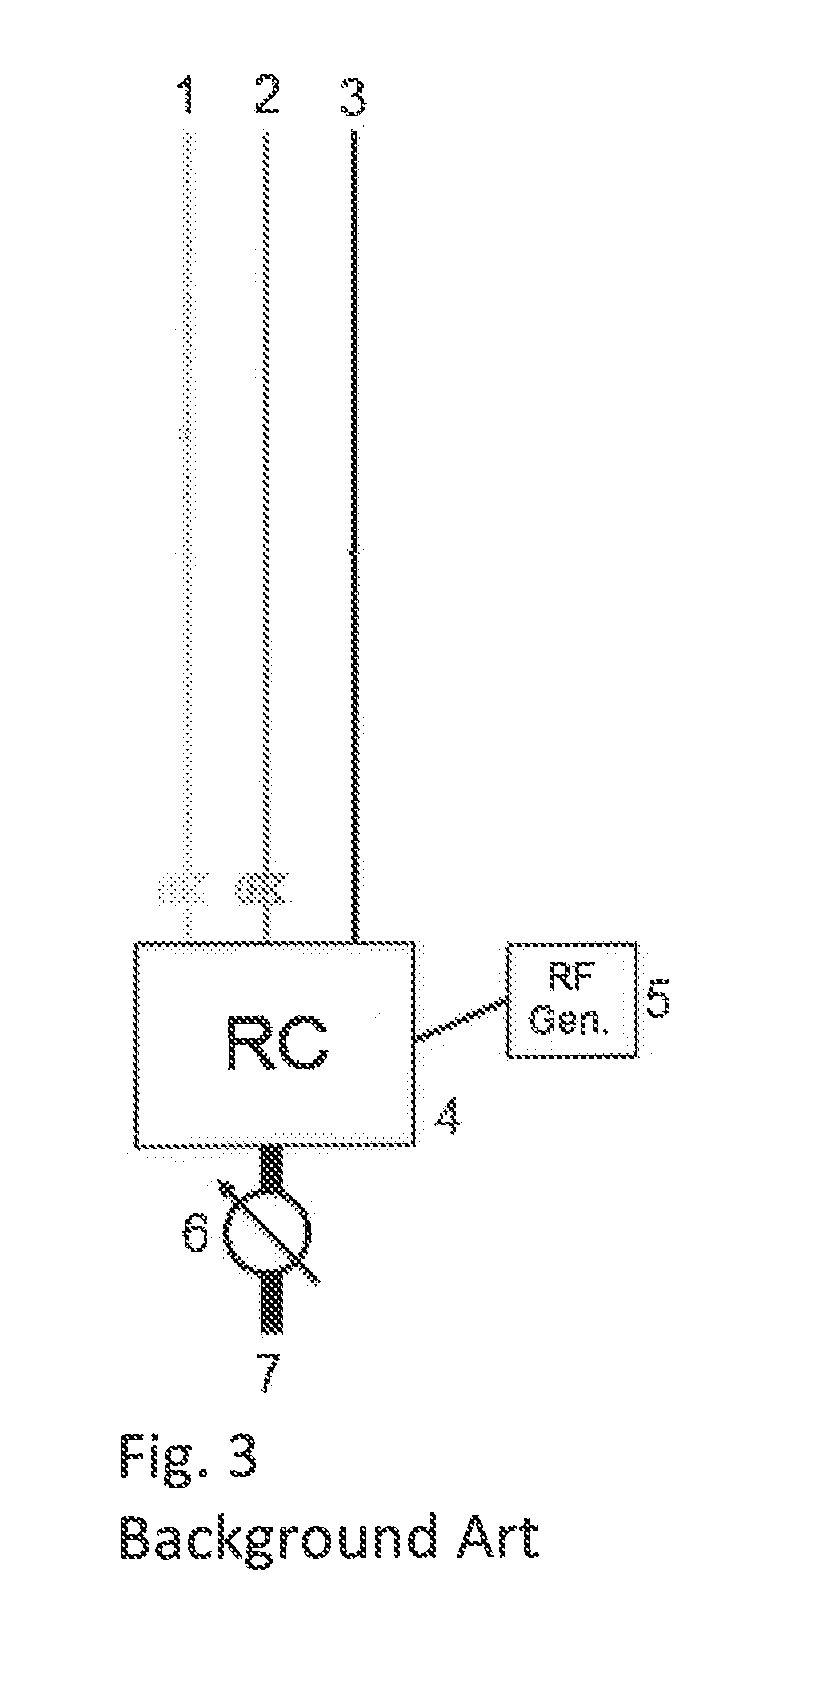 Method of Parallel Shift Operation of Multiple Reactors